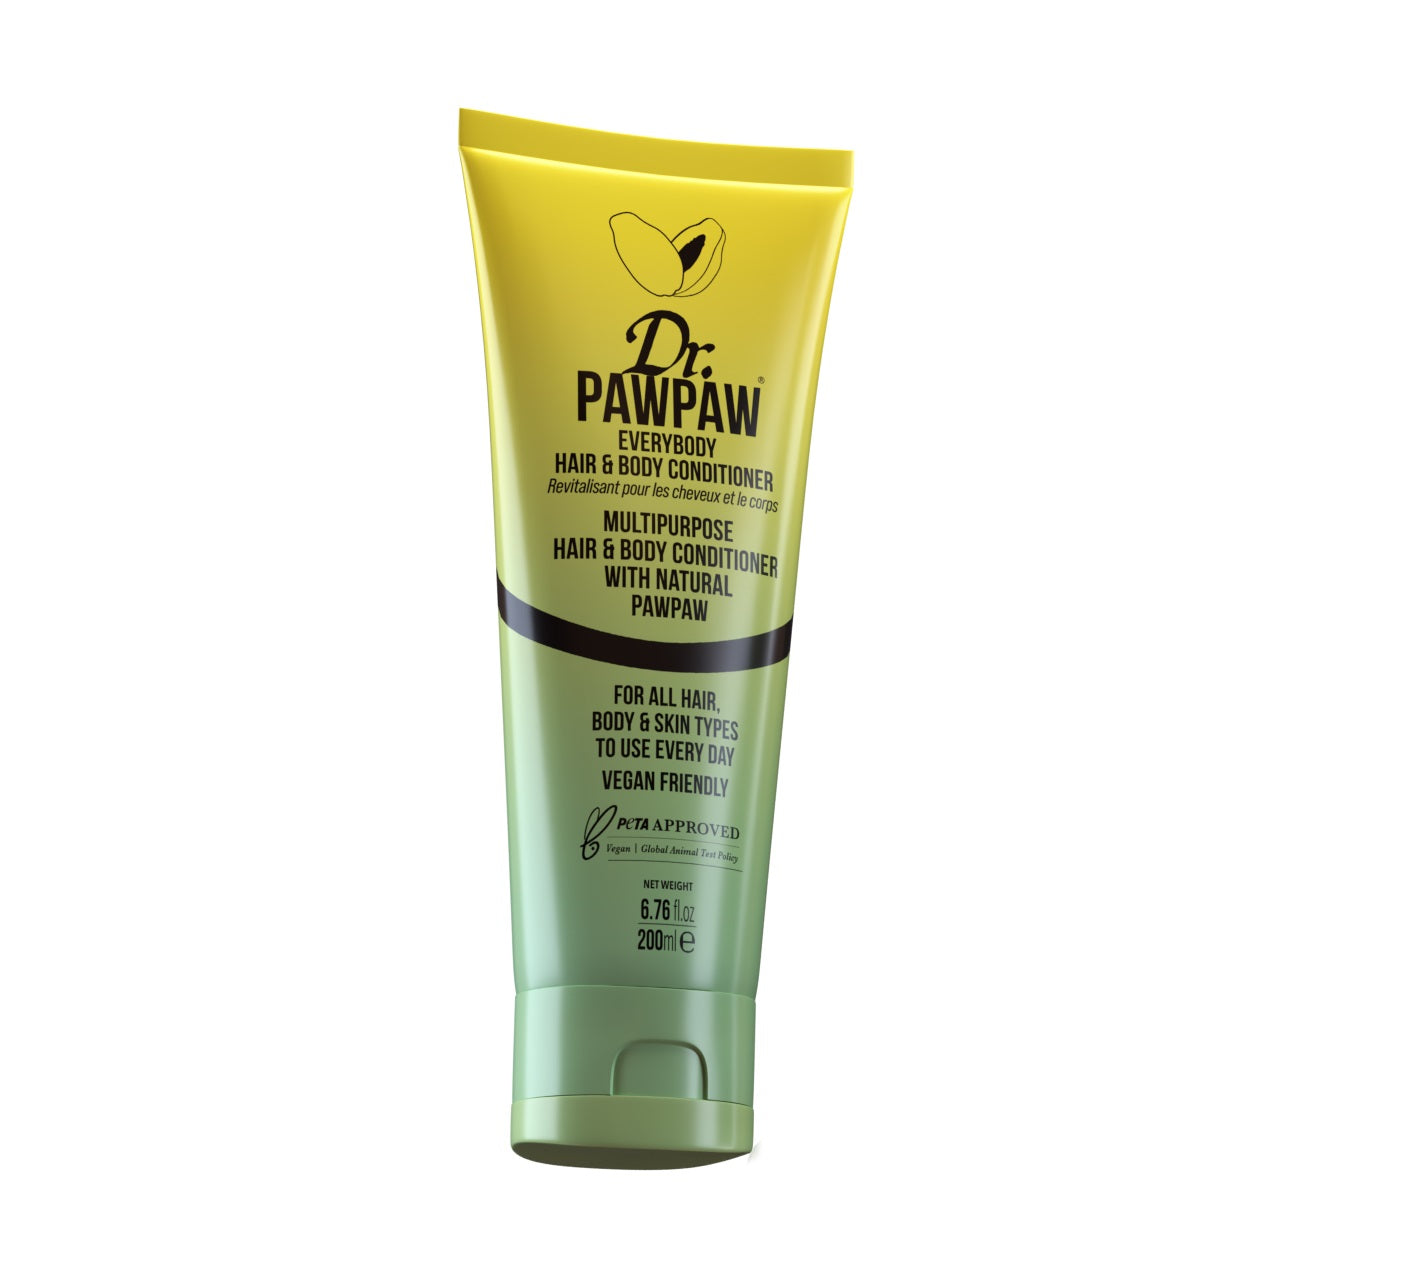 Dr Pawpaw Everybody Hair & Body Conditioner